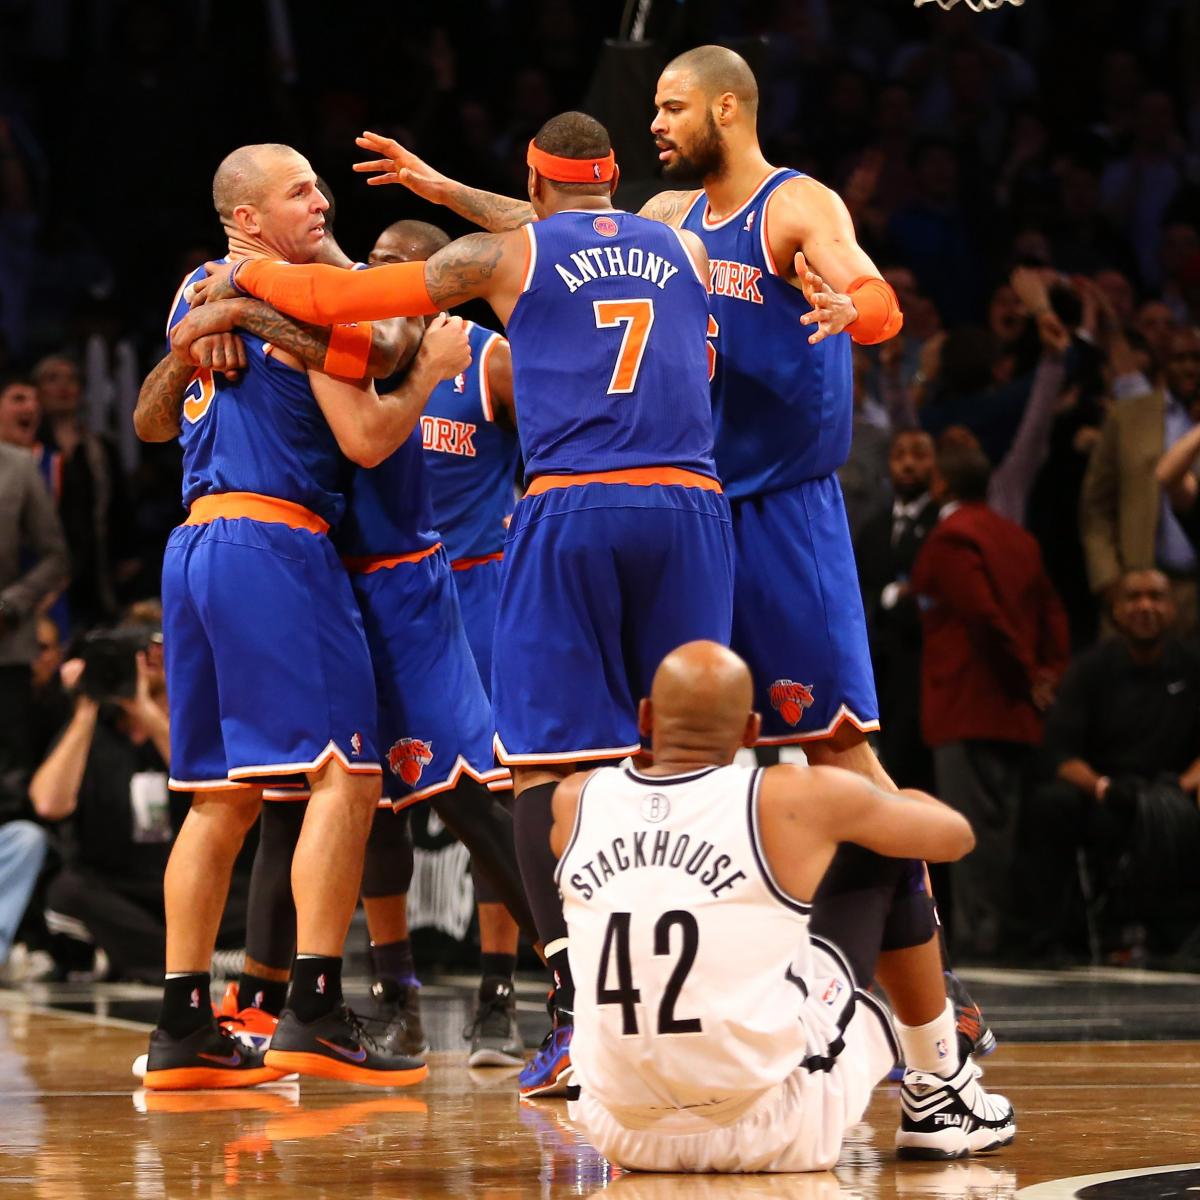 Brooklyn Nets vs. New York Knicks Live Score, Results and Game